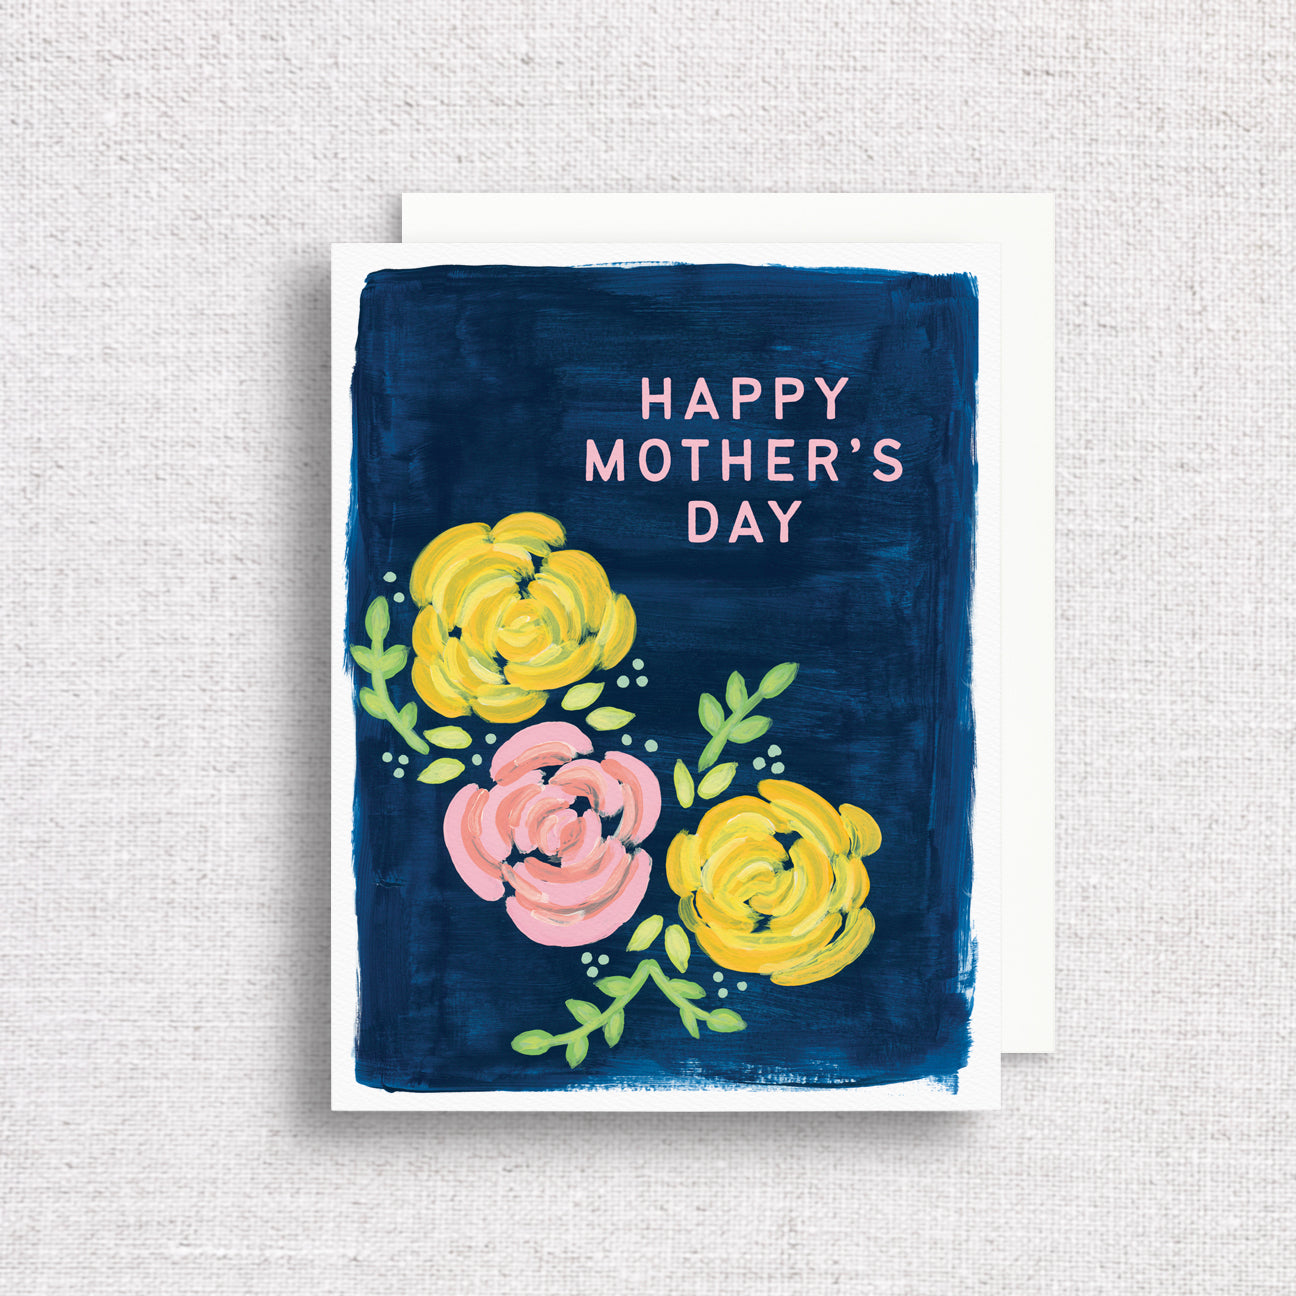 Happy Mother's Day Navy Floral Greeting Card by Gert & Co